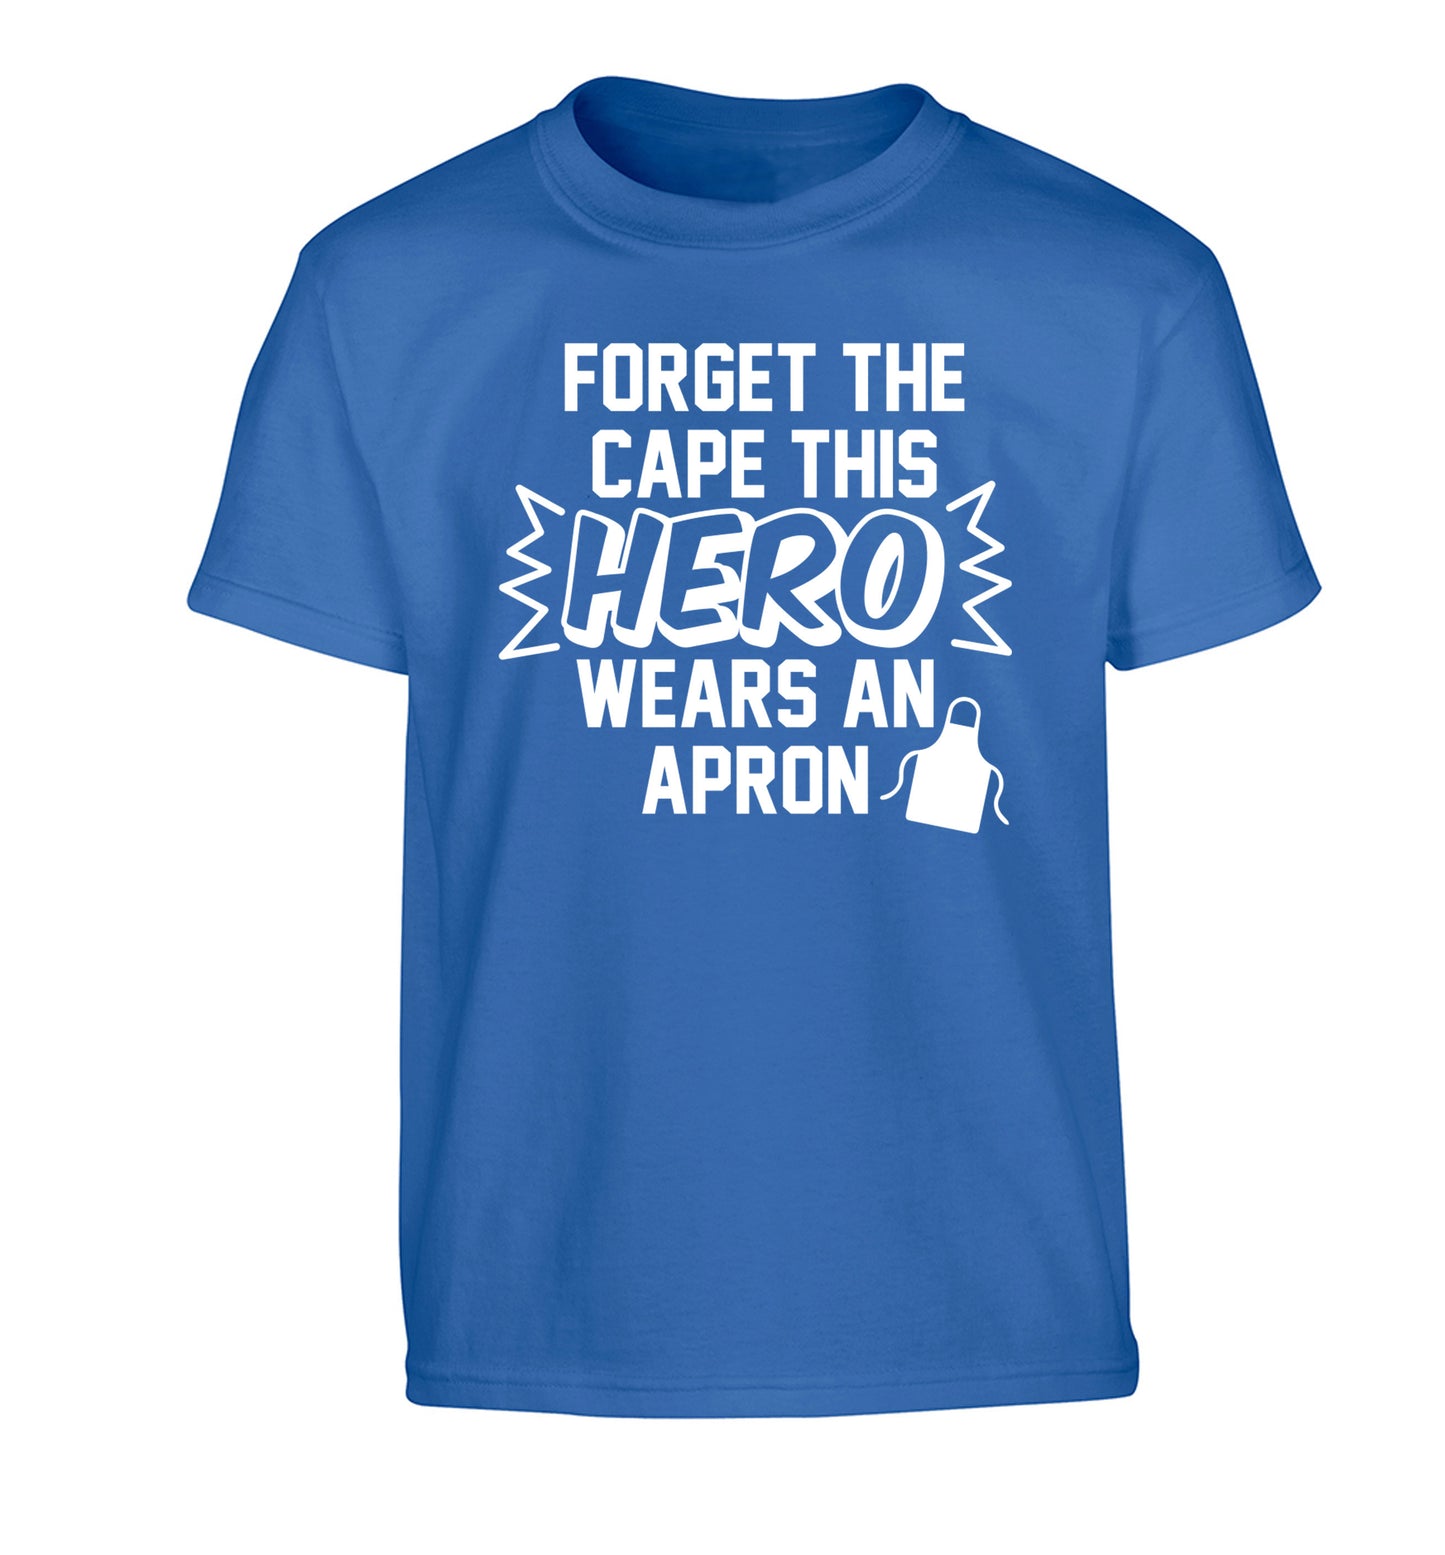 Forget the cape this hero wears an apron Children's blue Tshirt 12-14 Years